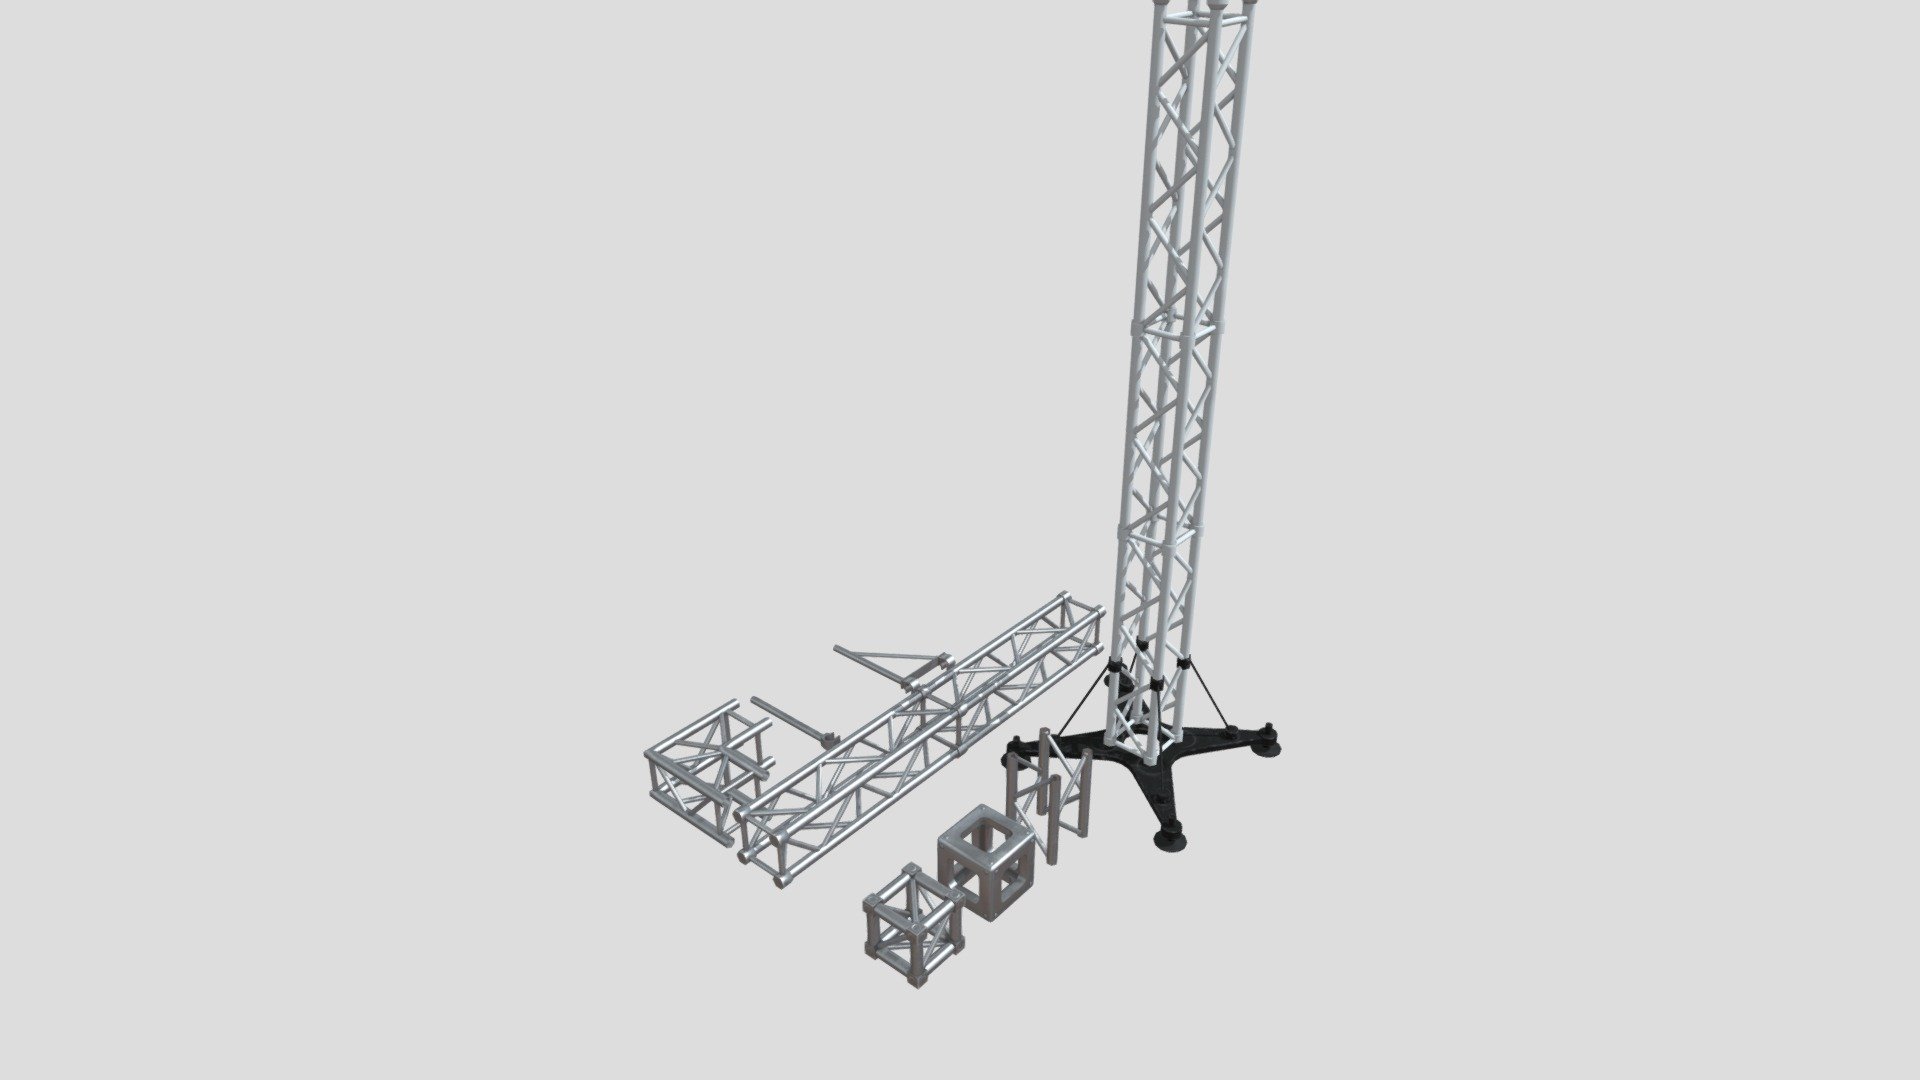 This is a collection of different trusses that are easily customizable to create any truss structure such as a stage, antennas, or scaffolding. The models can be easily edited in edit mode to adjust lengths, shapes, etc. The meshes are viewable from all angles and distances.

This Includes:

The mesh (Truss Vertical, Truss Horizontal, Truss Single, Truss Block, Truss Base, Truss 90, Clamp, Pole, Clamp Support Pole, Intersection)
-4K and 2K Texture Sets (Albedo, Metallic, Roughness, Normal, Height)

2 Variants (Clean, Rusty)
The meshes are UV Unwrapped with vertex colors for easy retexturing - Clean and Rusty Trusses 4K and 2K - Buy Royalty Free 3D model by Desertsage 3d model